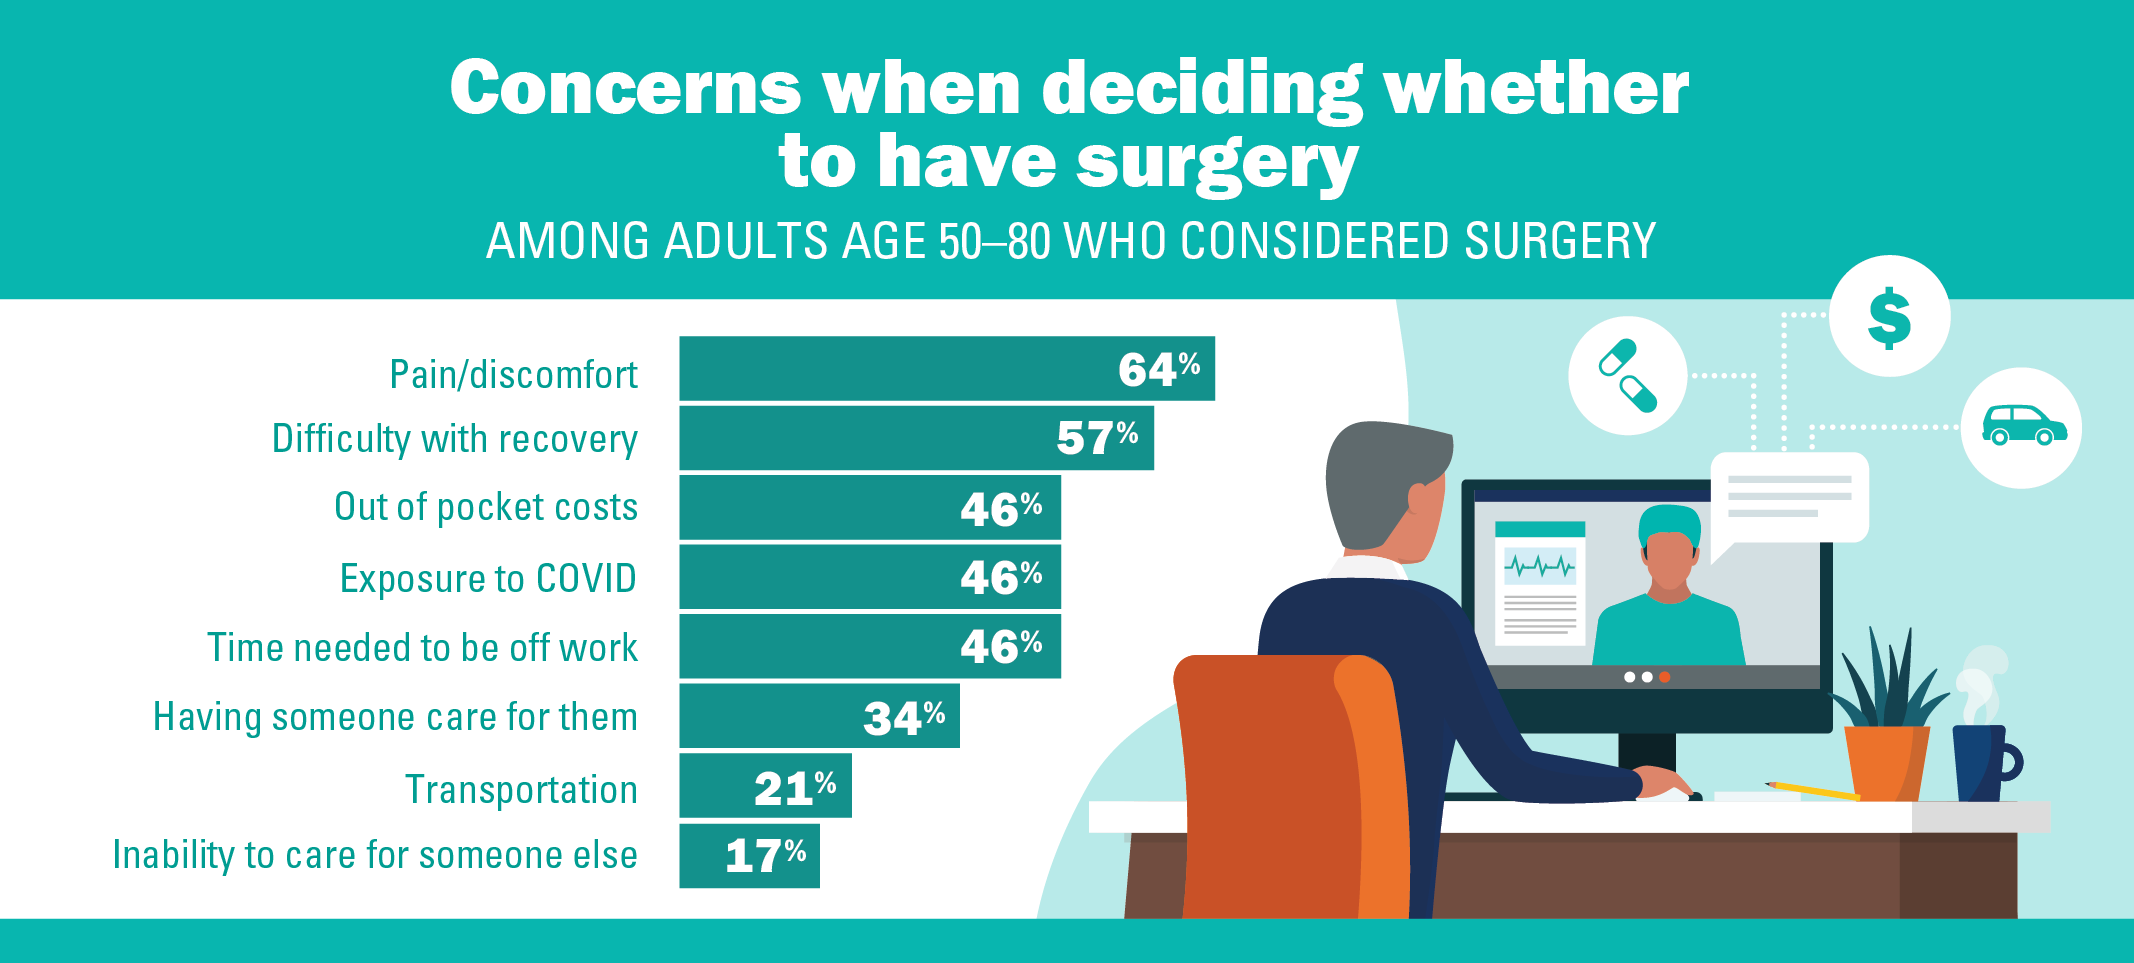 Concerns about elective surgery among adults 50-80